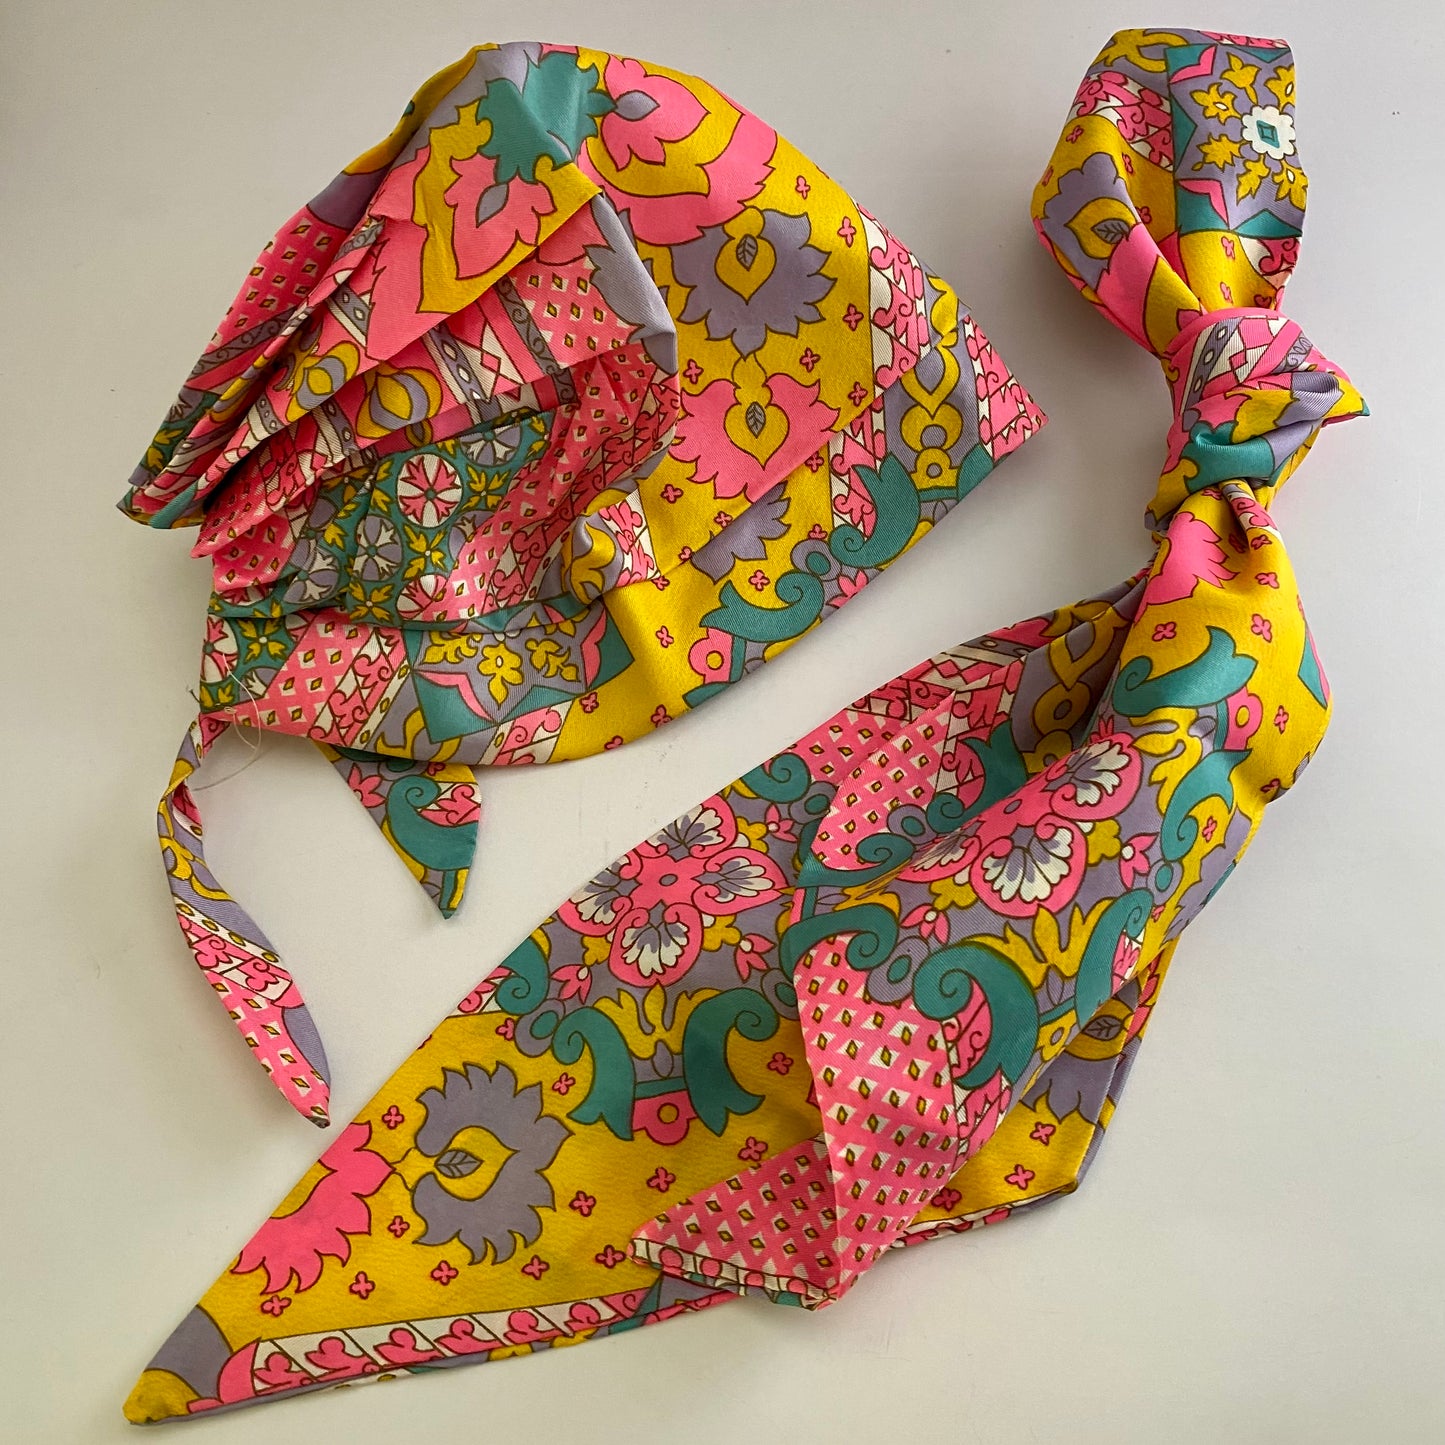 1960s Psychedelic Paisley Turban/ Head Scarf With Matching Scarf